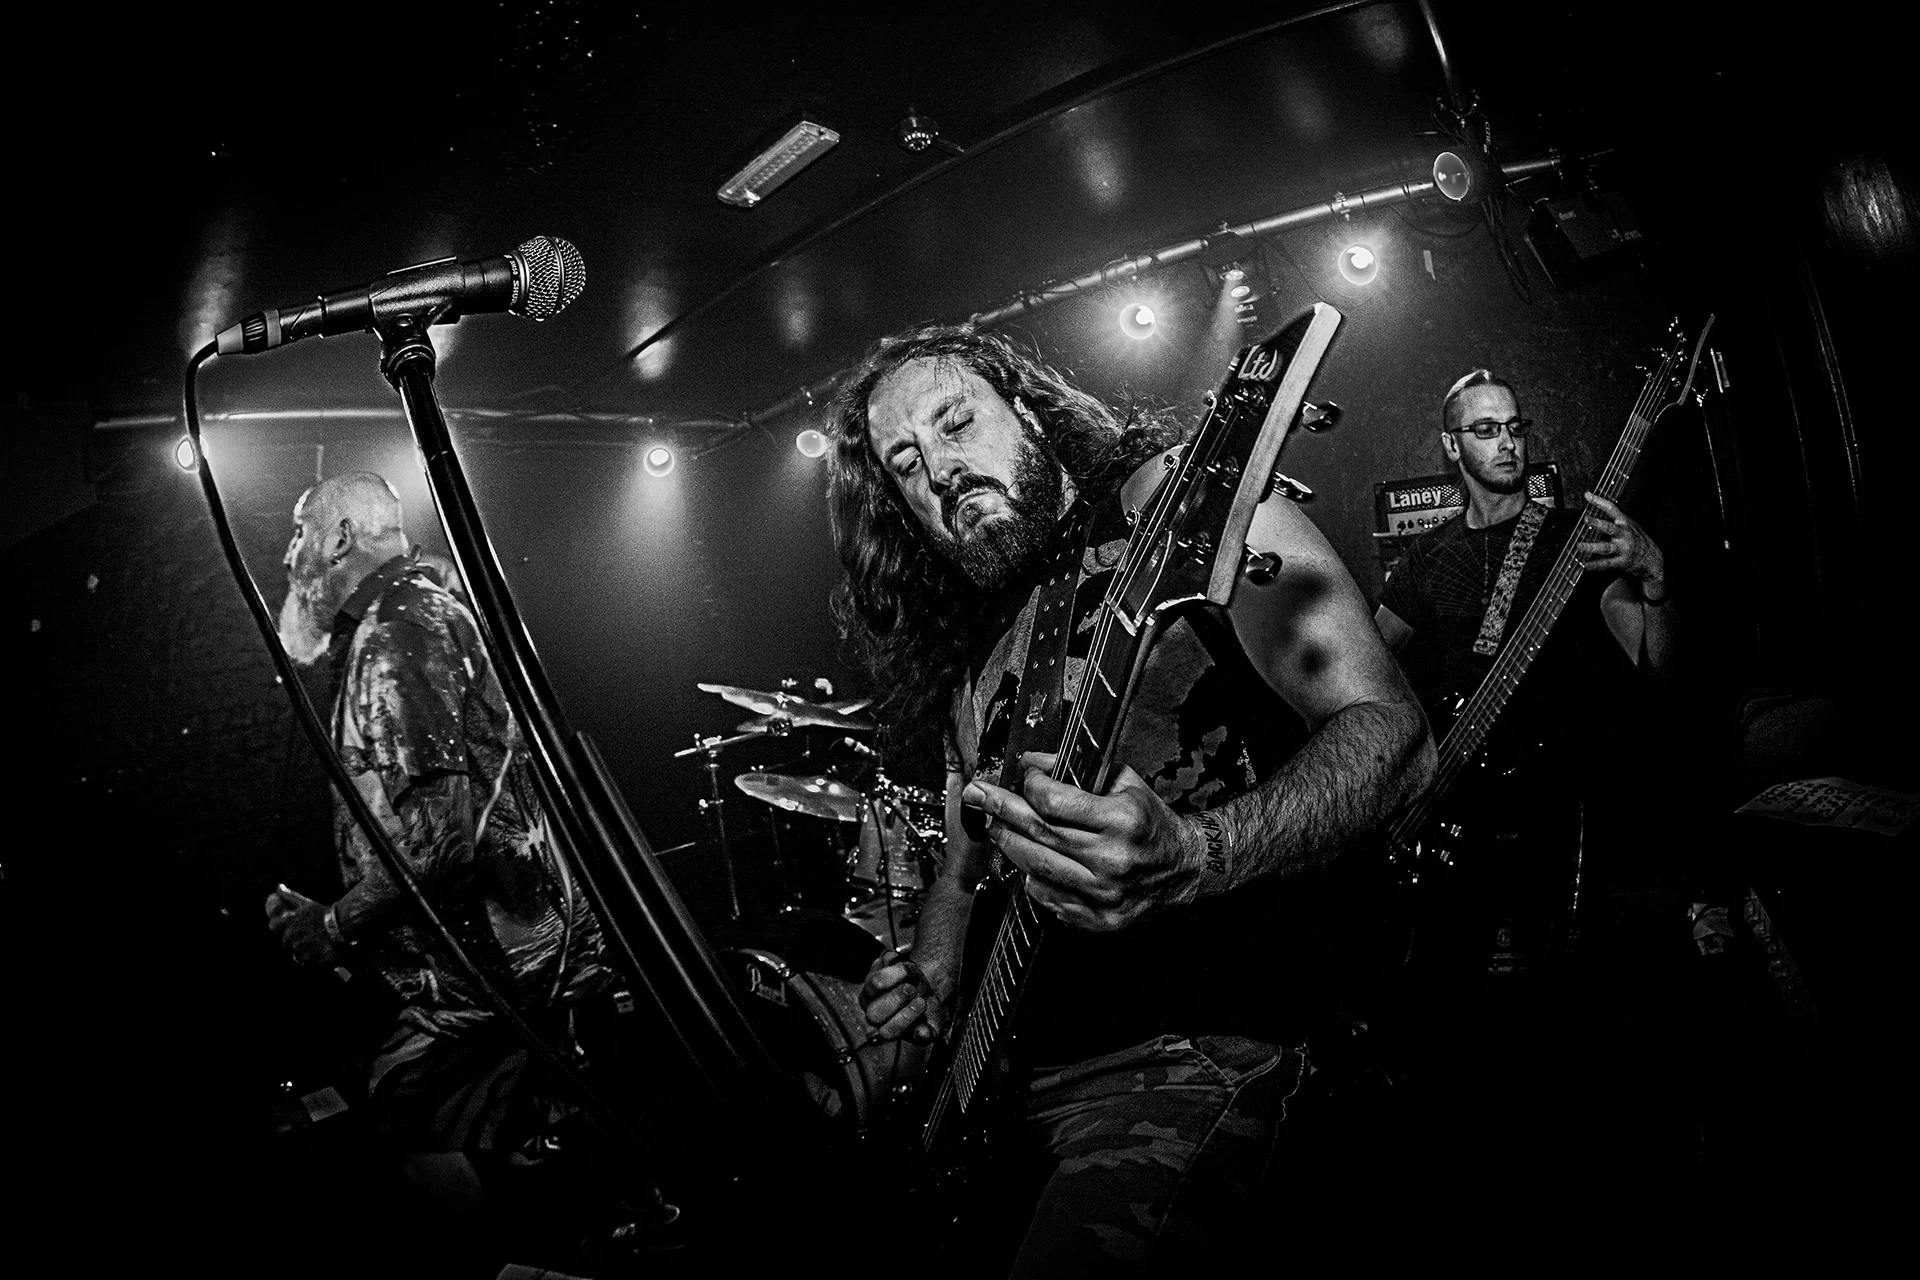 AWAP live at The Black Heart - Photo by: Charley Shillabeer